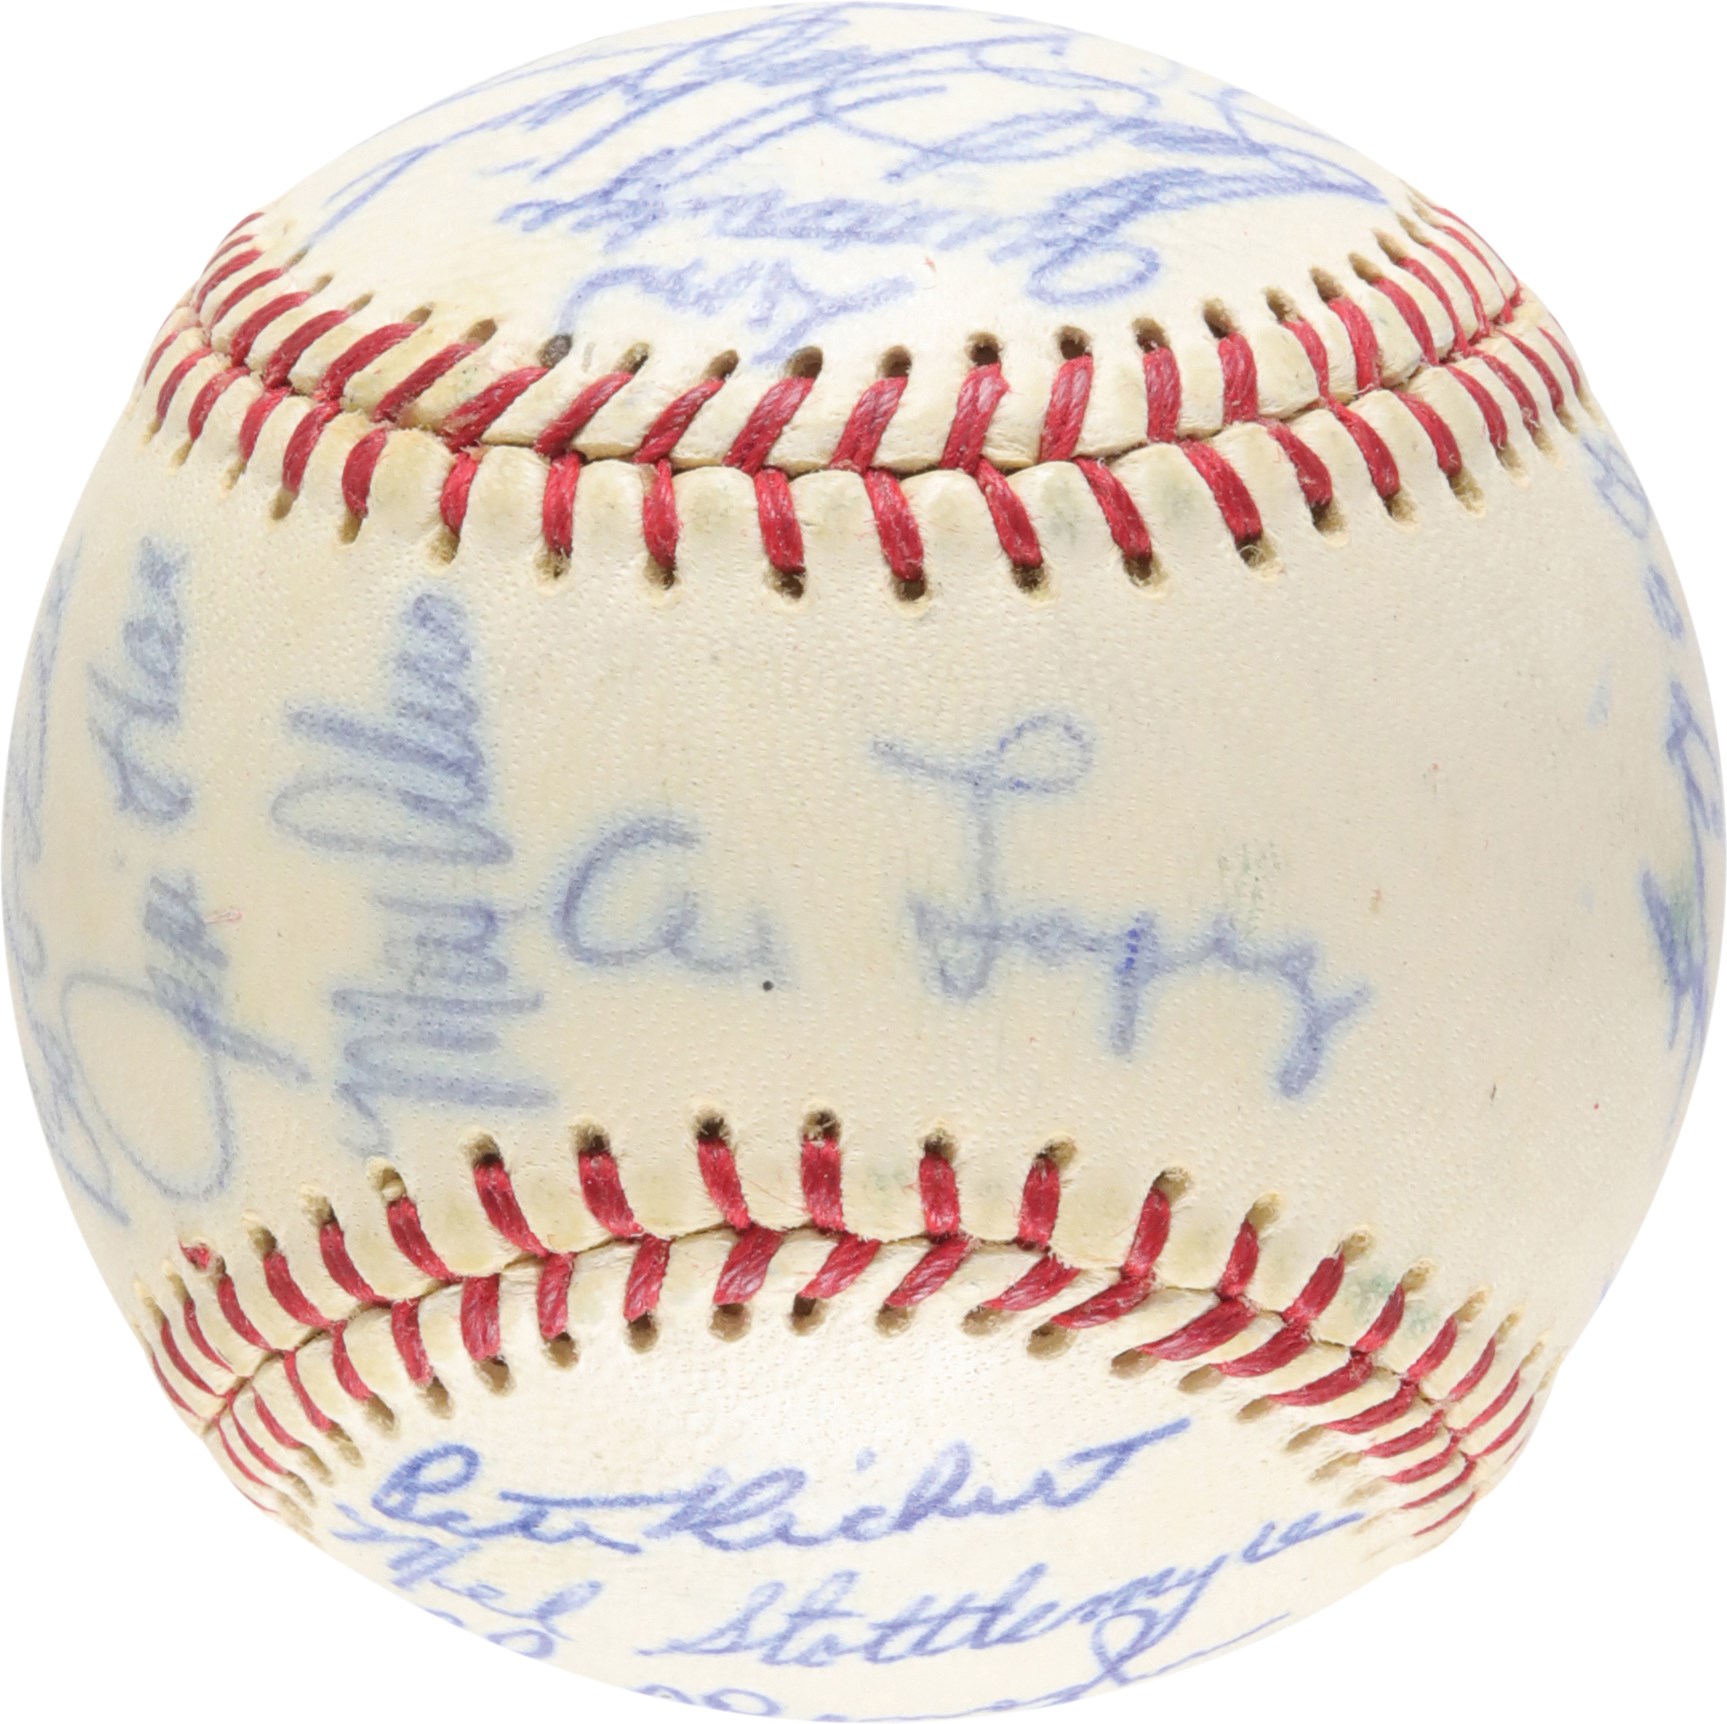 1965 American League All-Star Team-Signed Baseball (ex-Al Kaline Collection)